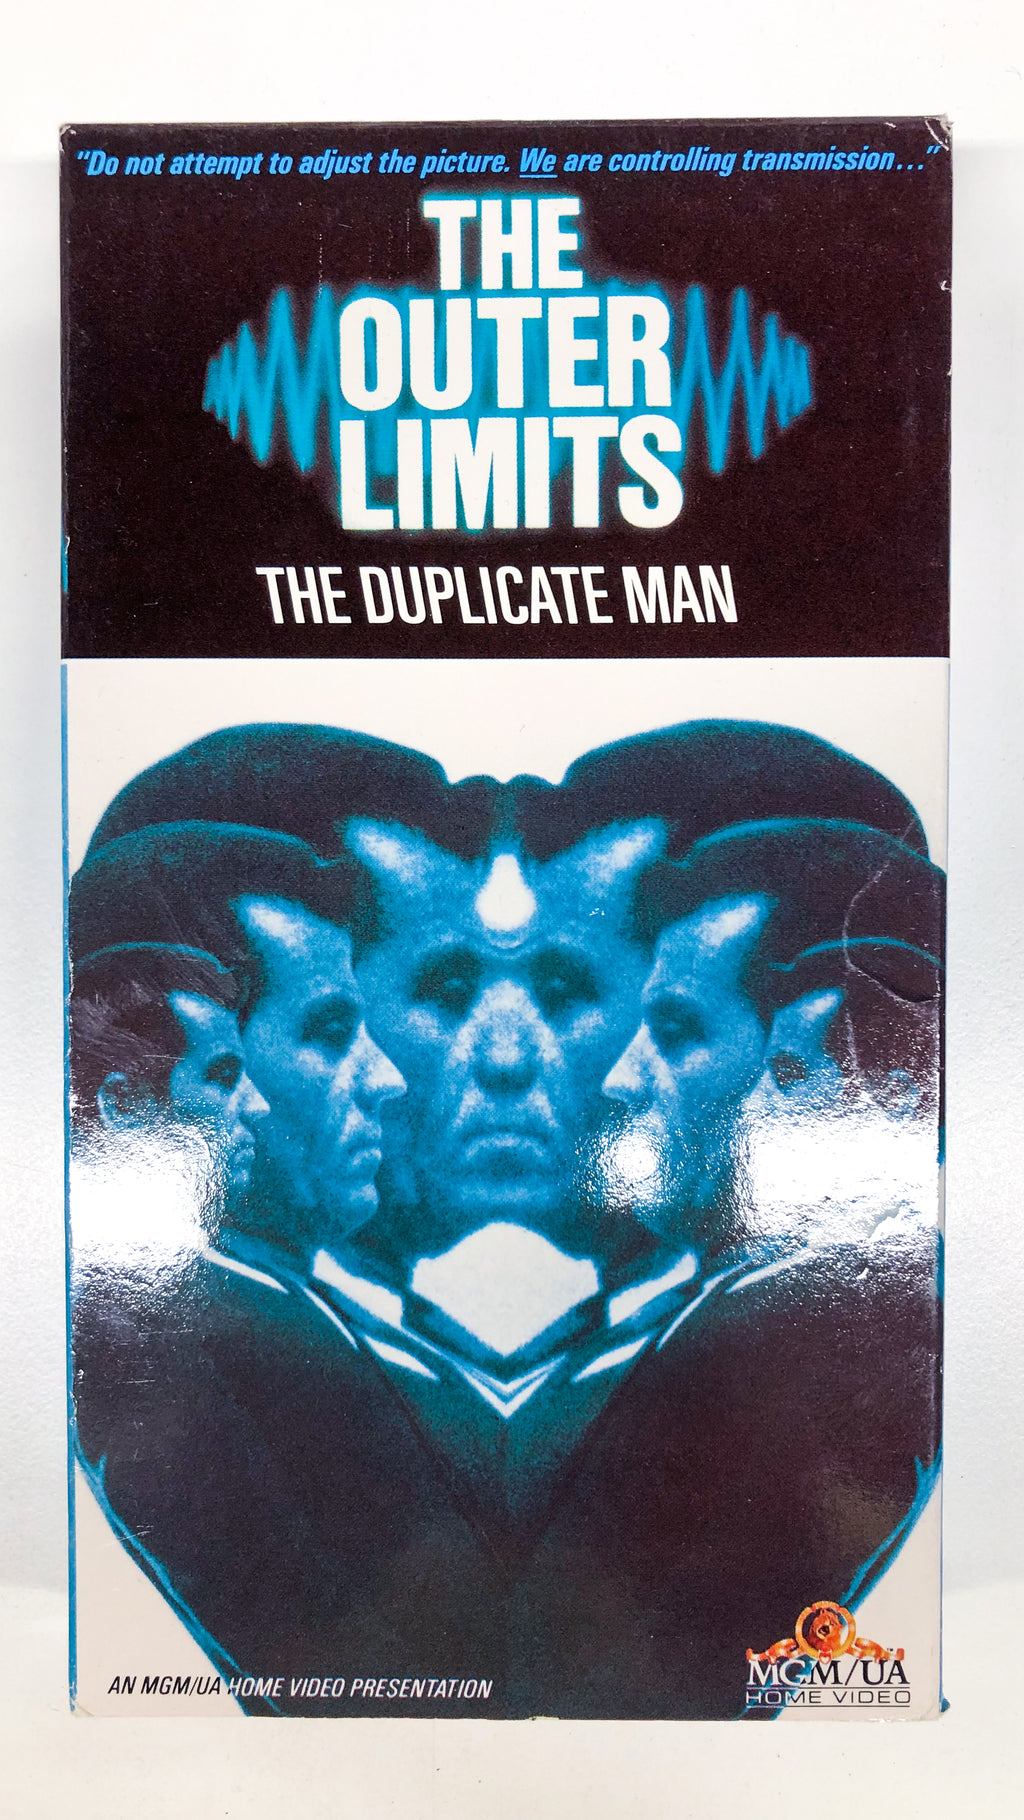 The Outer Limits: The Duplicate Man